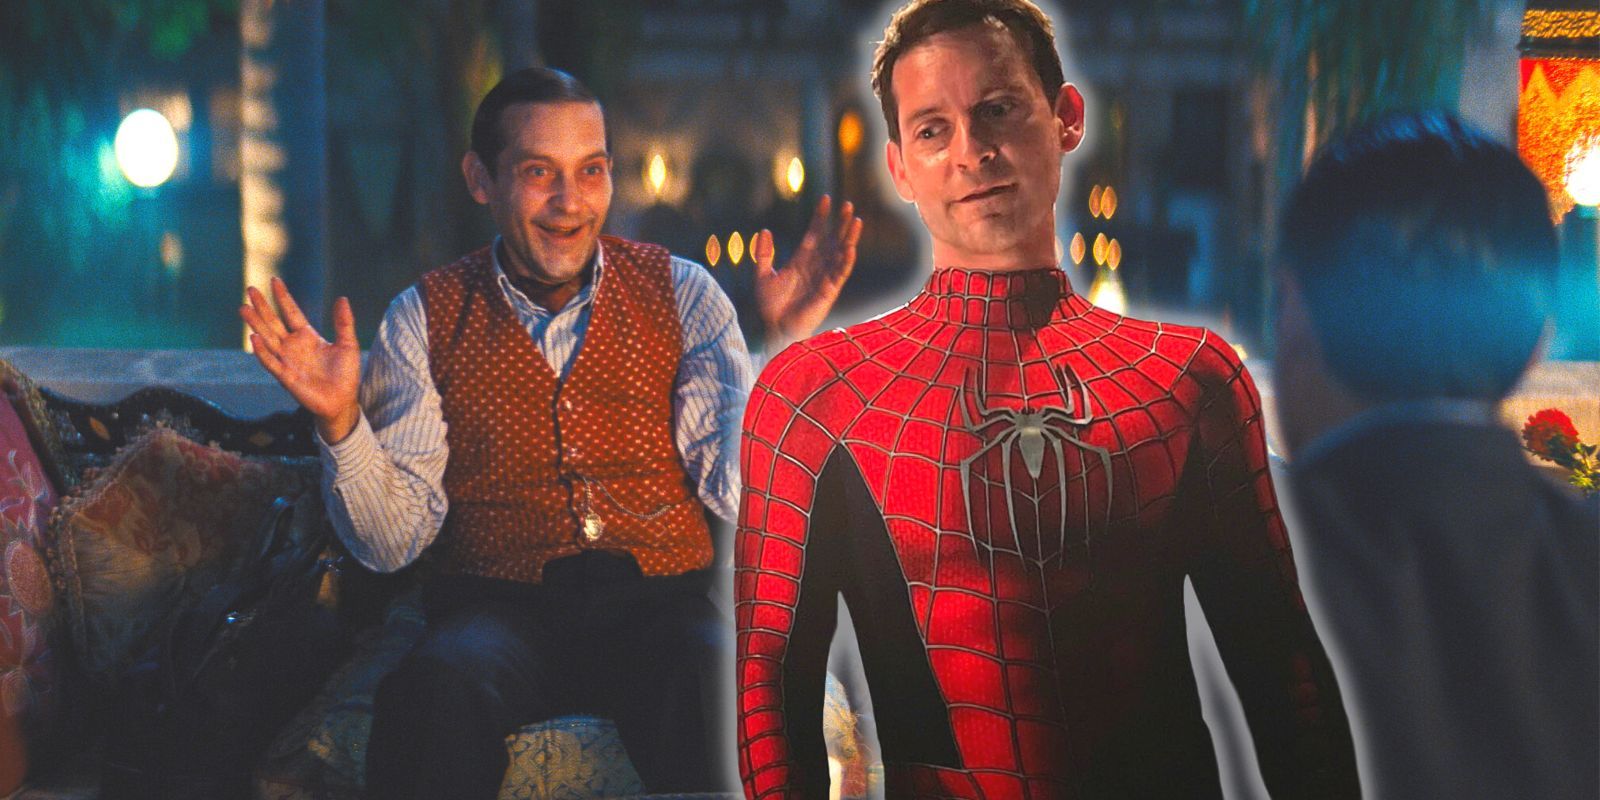 Tobey Maguire in Spider-Man: No Way Home glaring at his Babylon character